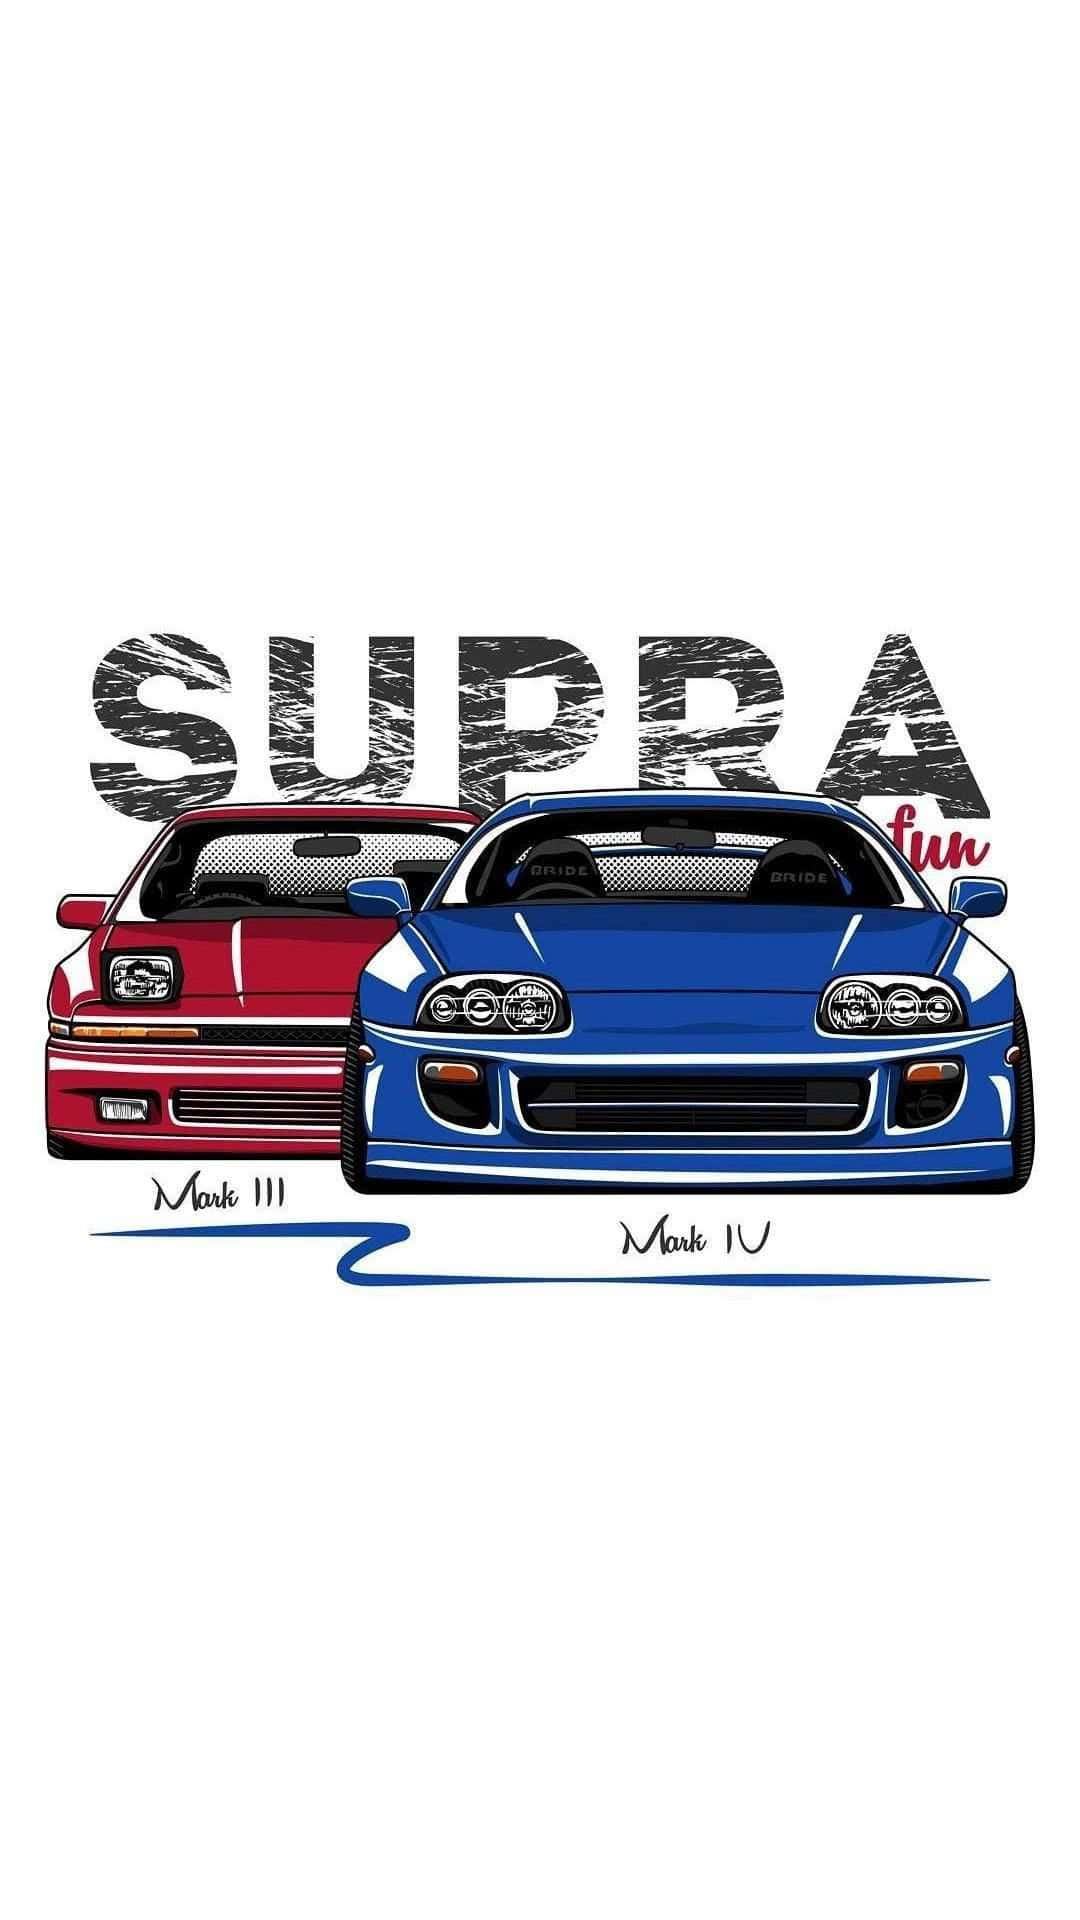 Jdm Supra parked and ready to race Wallpaper